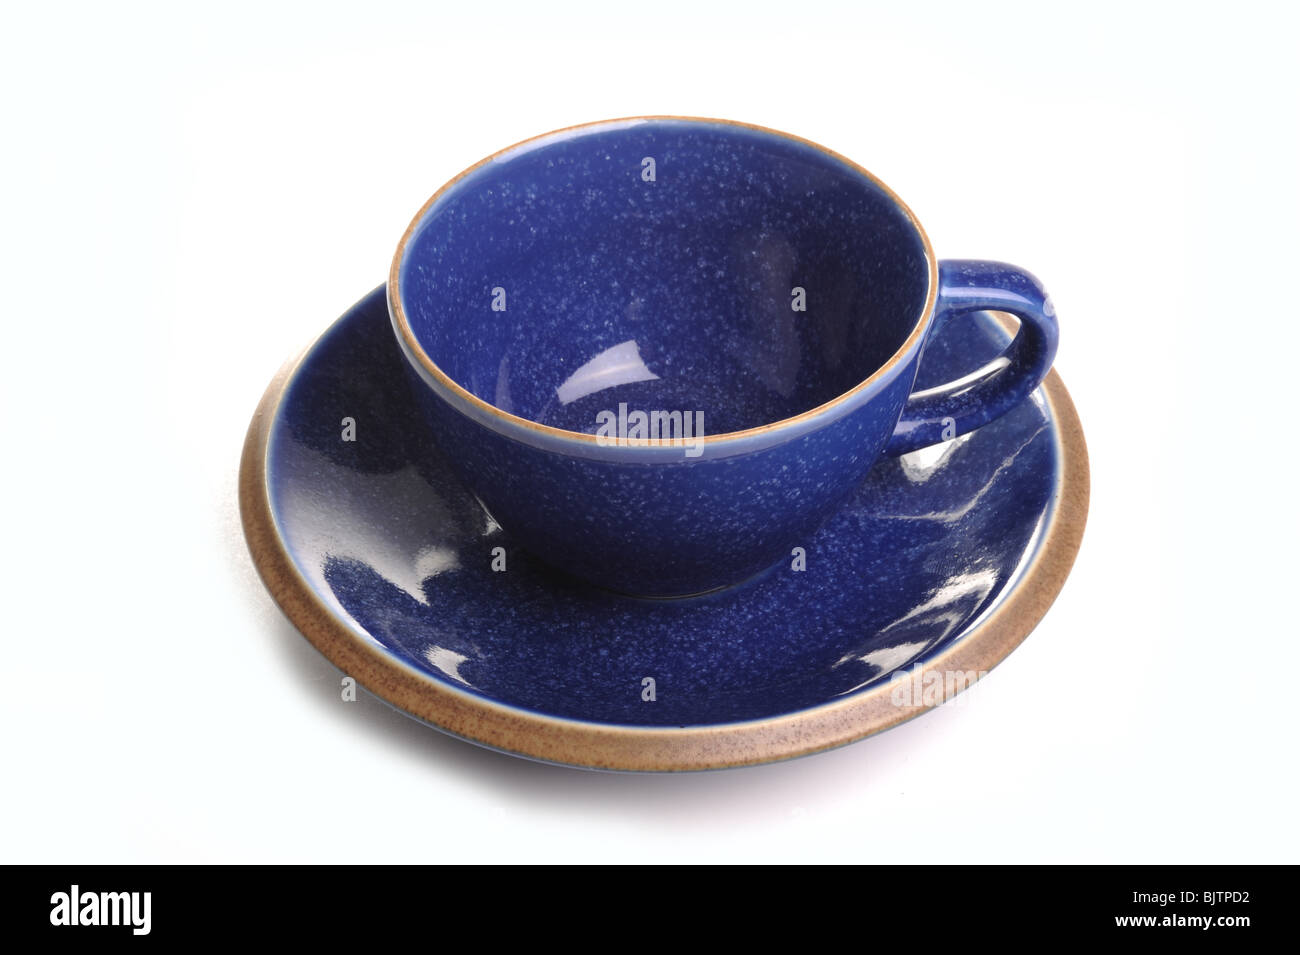 Blue tea cup and saucer photographed in studio against a white background Stock Photo